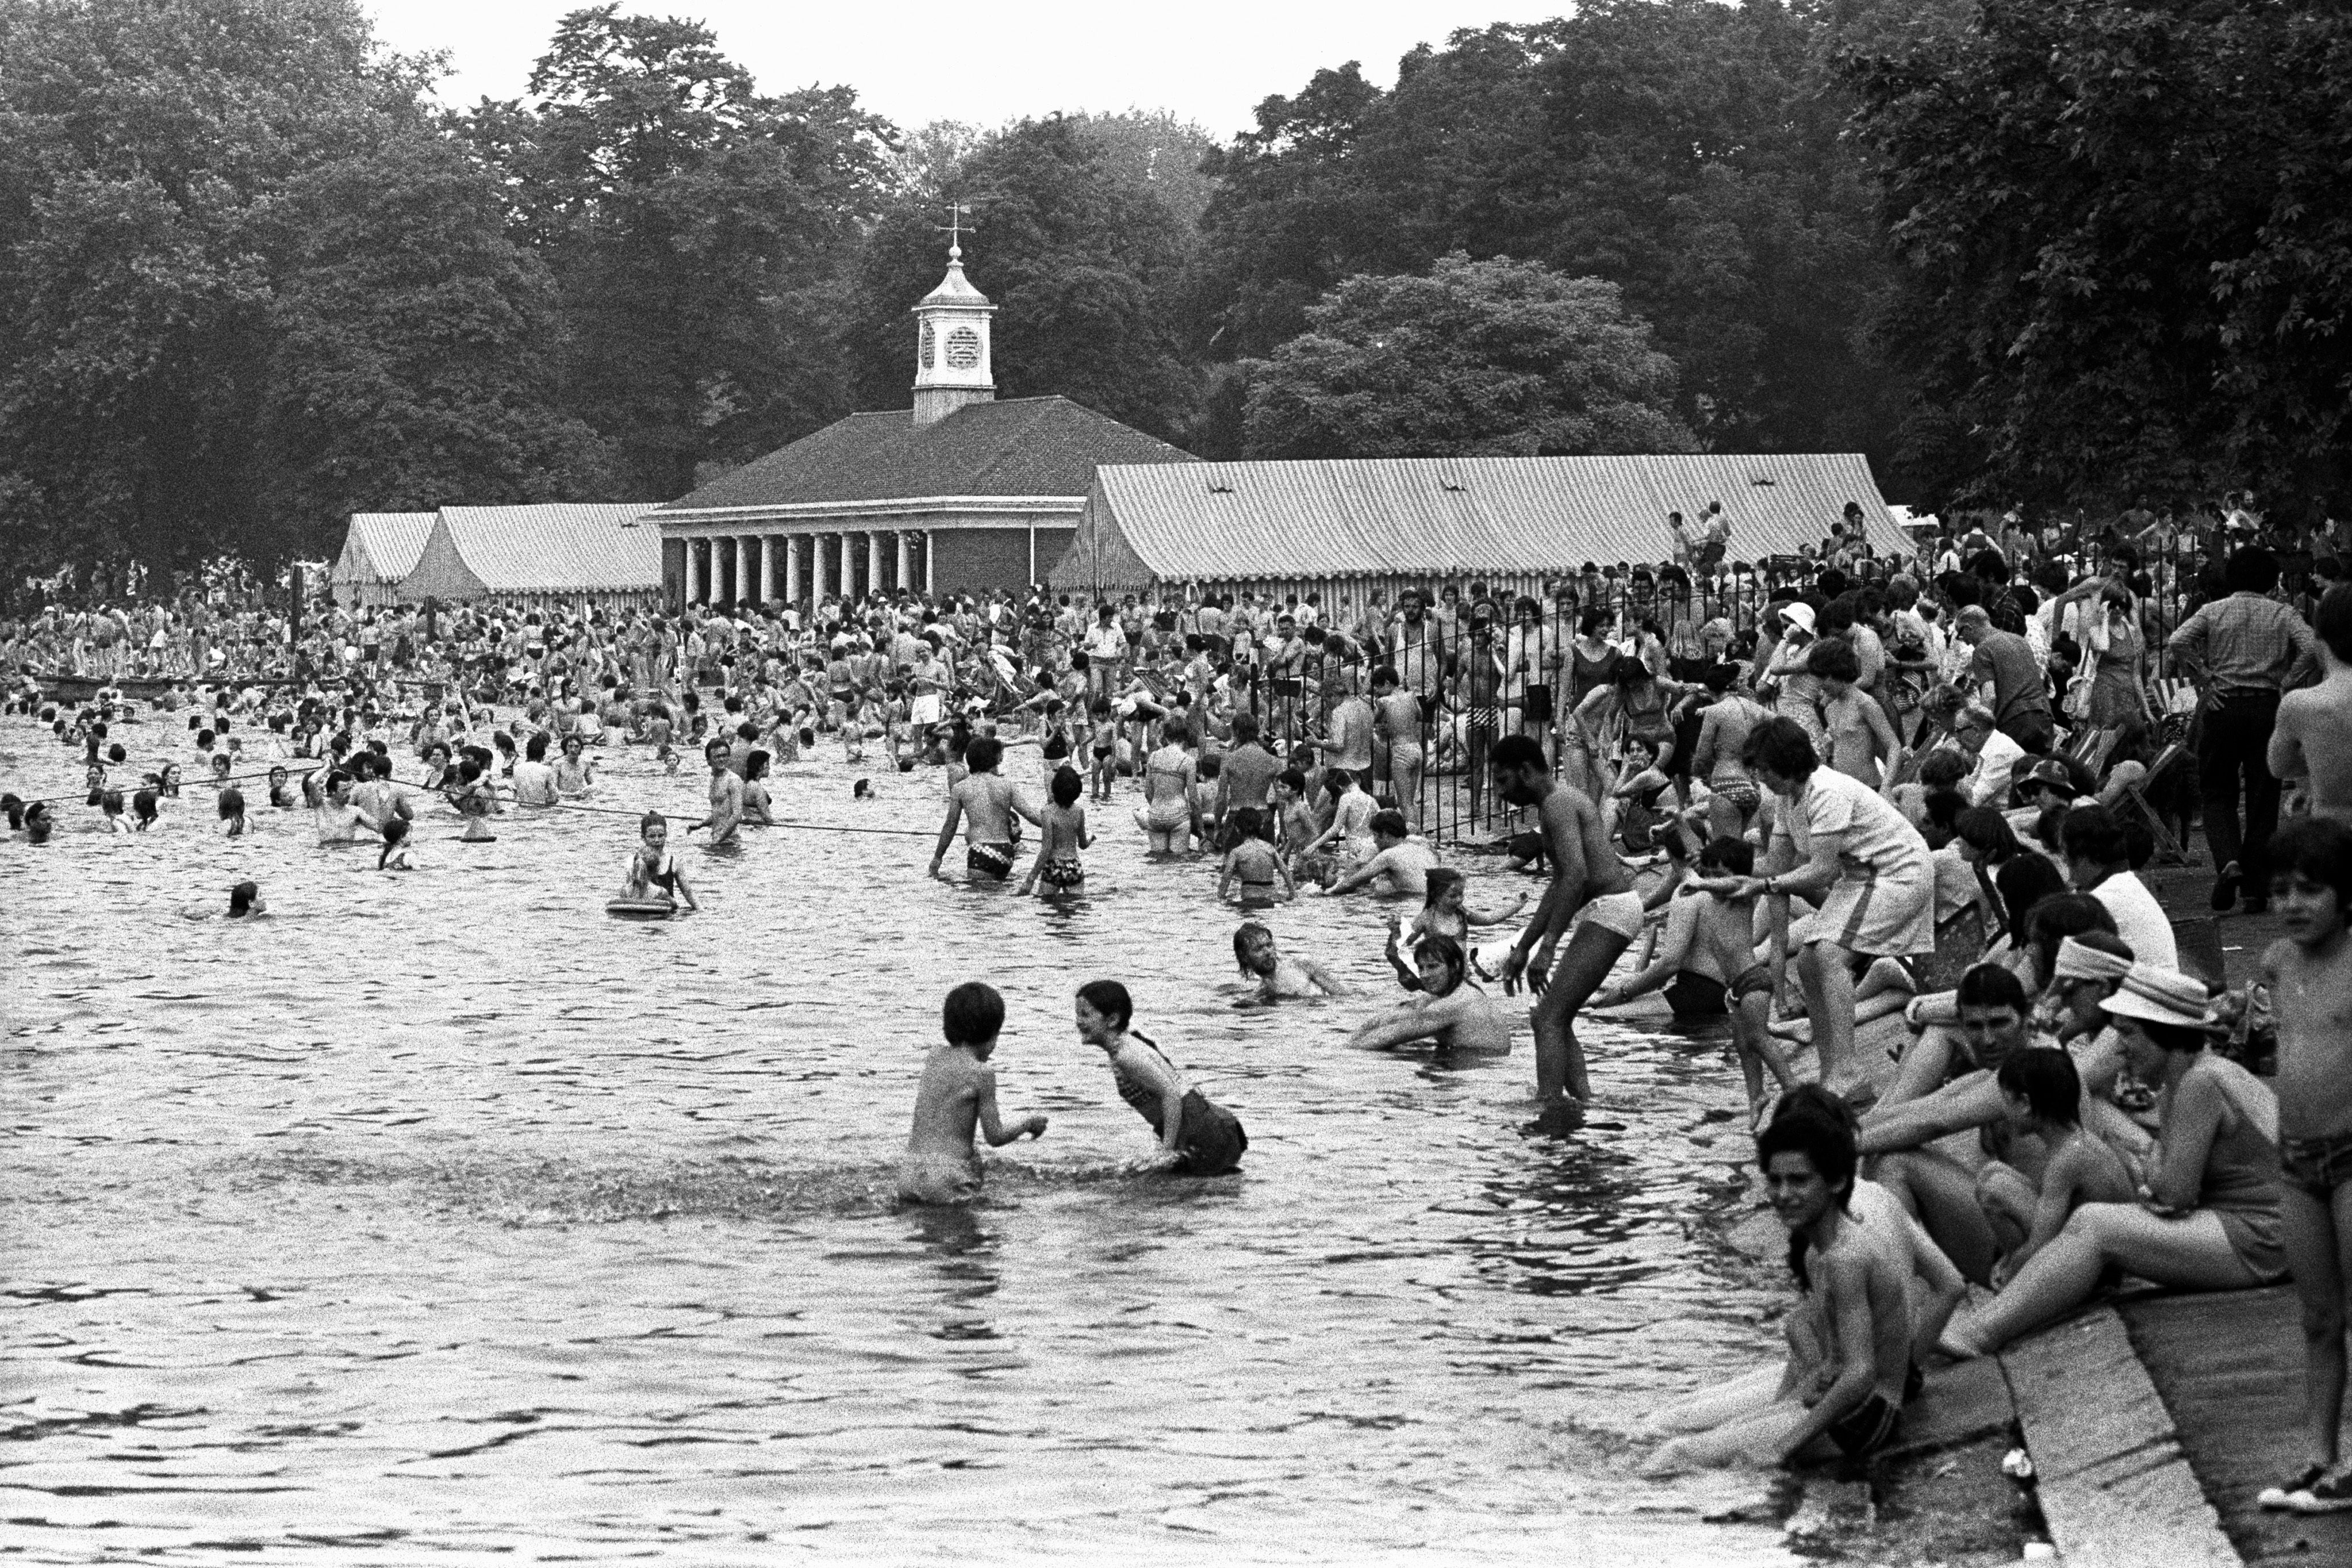 The scene at the Serpentine in London’s Hyde Park as people enjoy the heatwave in July 1976